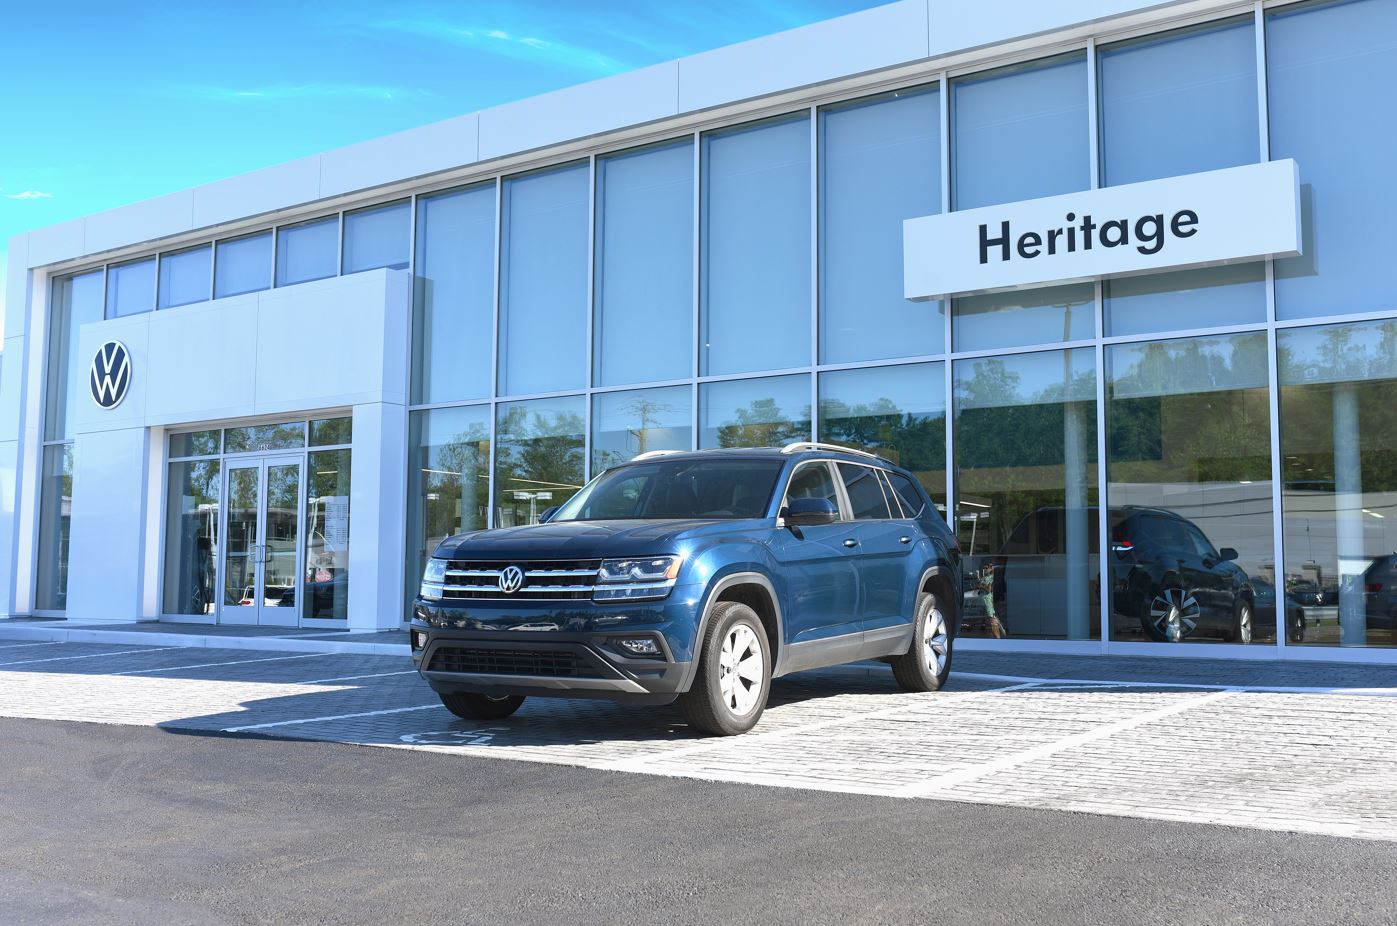 Heritage Volkswagen Catonsville - Baltimore, MD 21228 - (844)224-1956 | ShowMeLocal.com